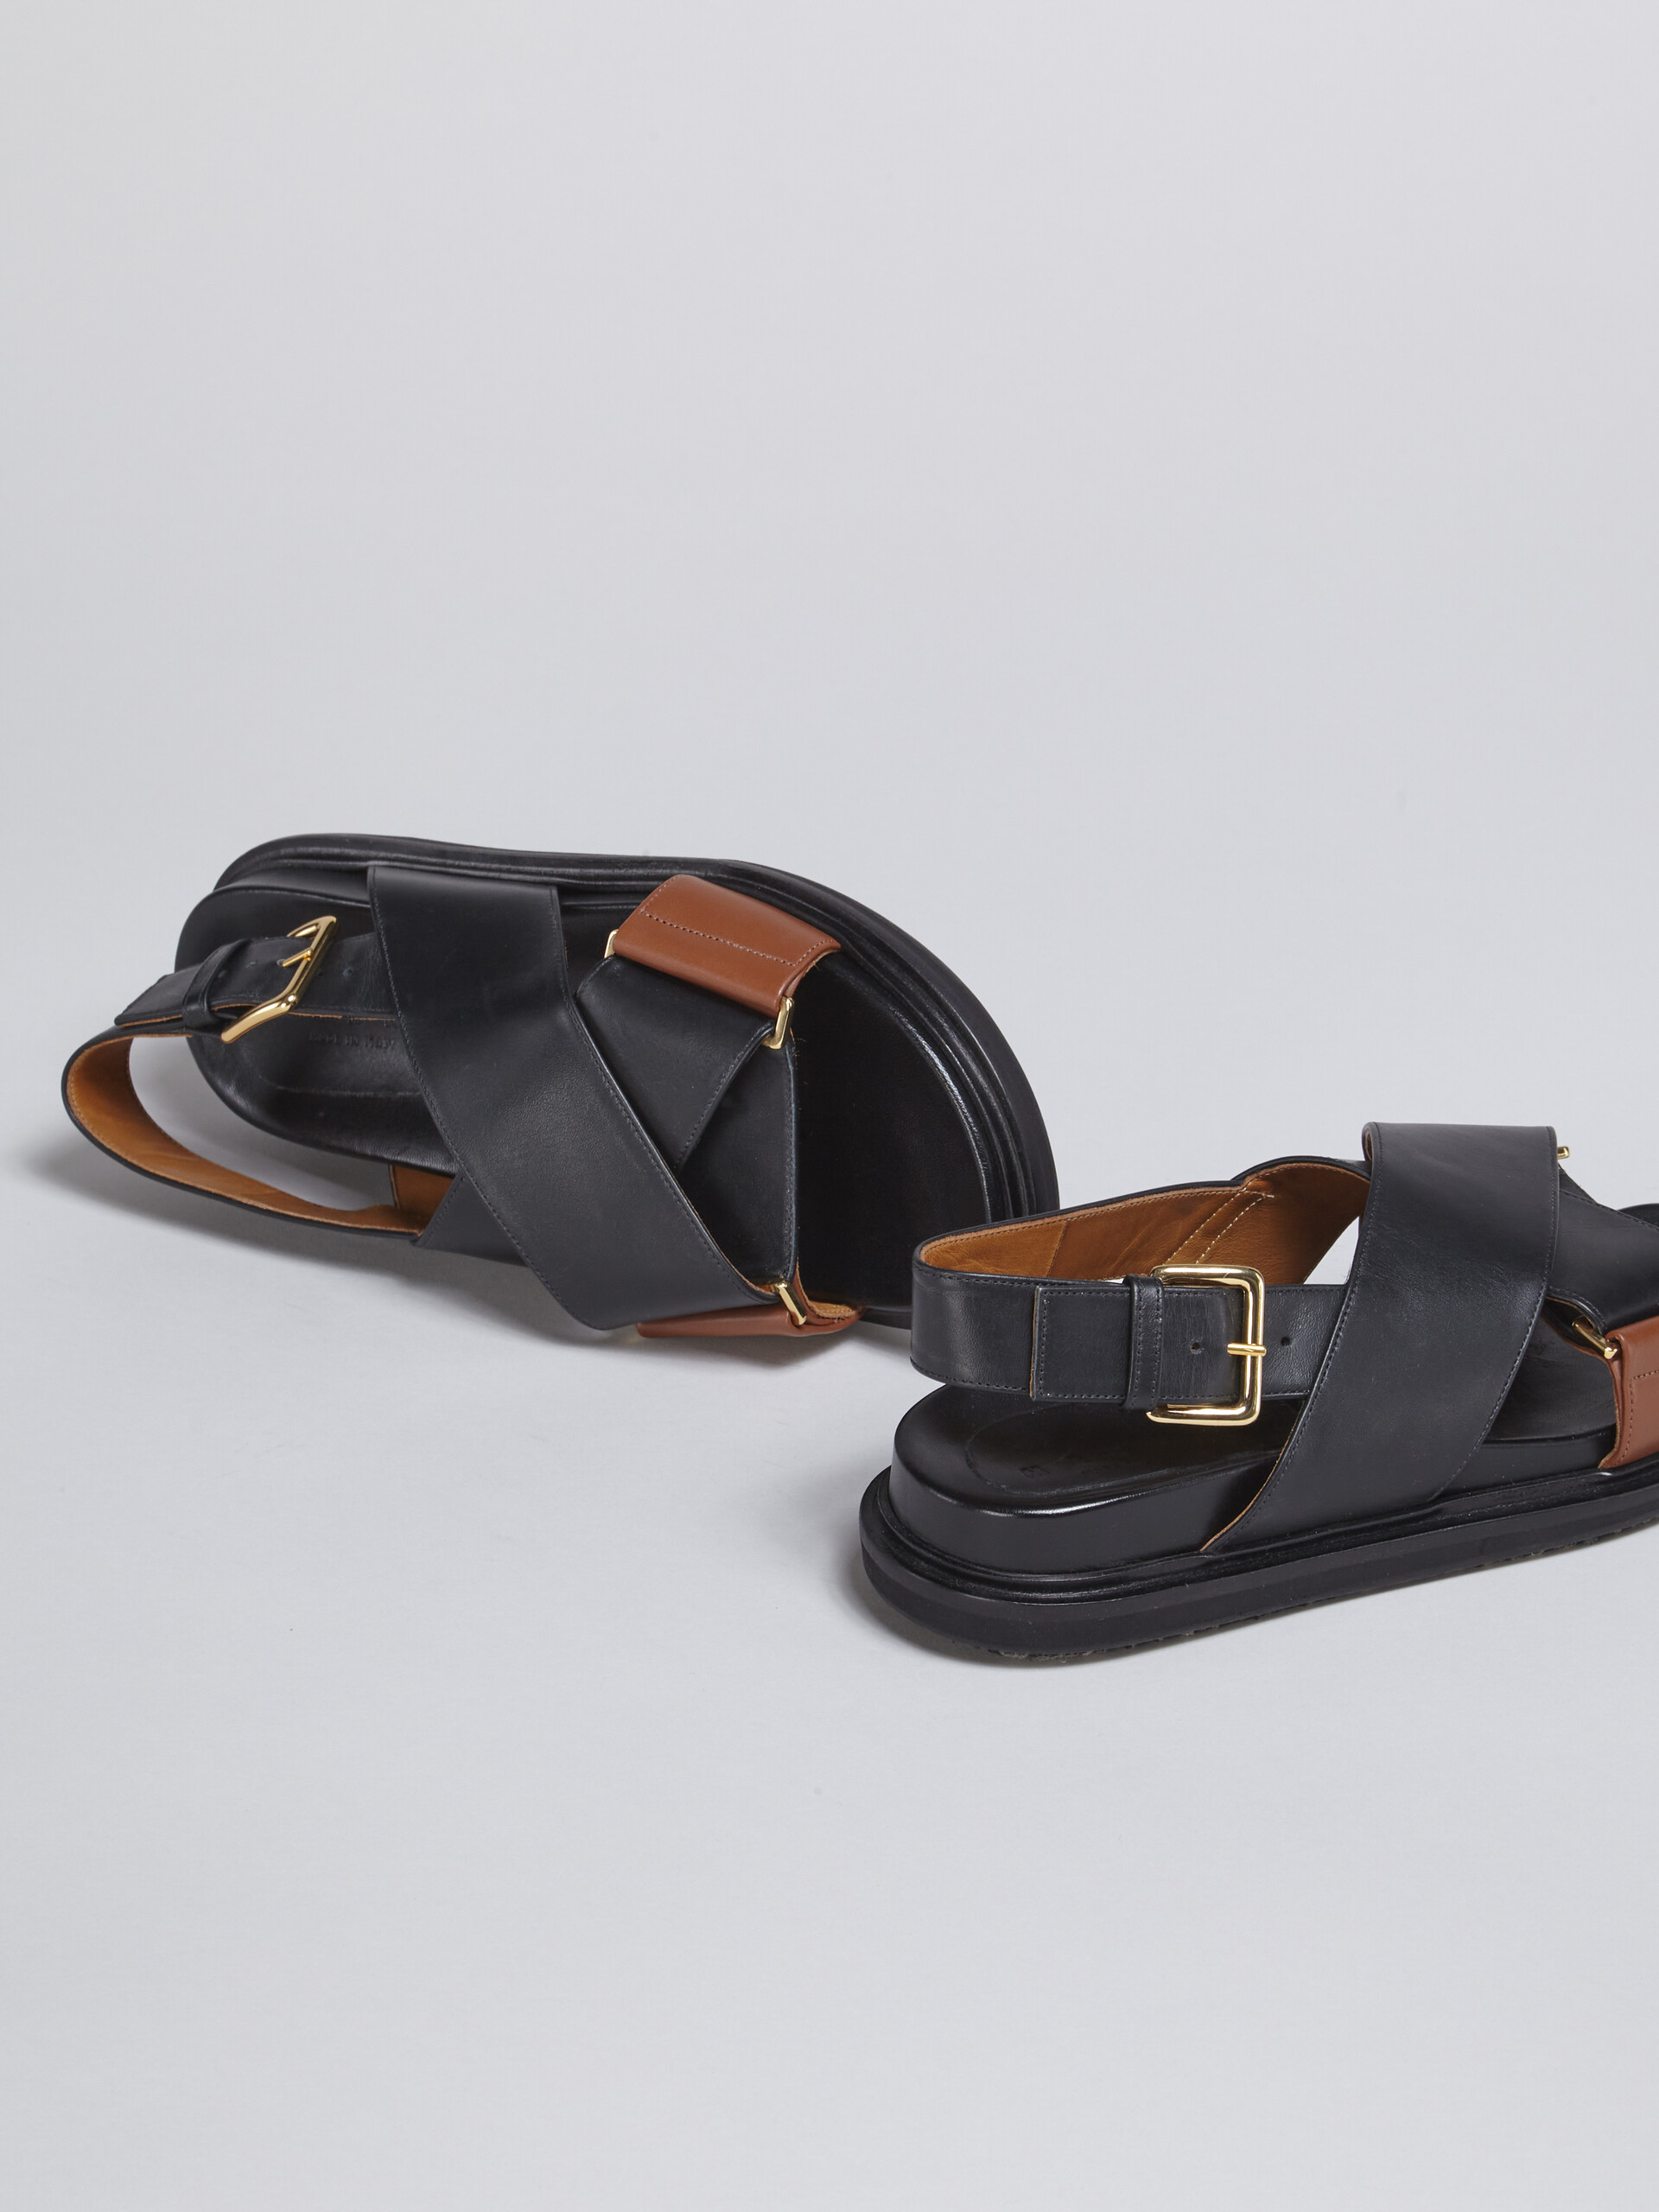 Black and brown leather Fussbett - Sandals - Image 5